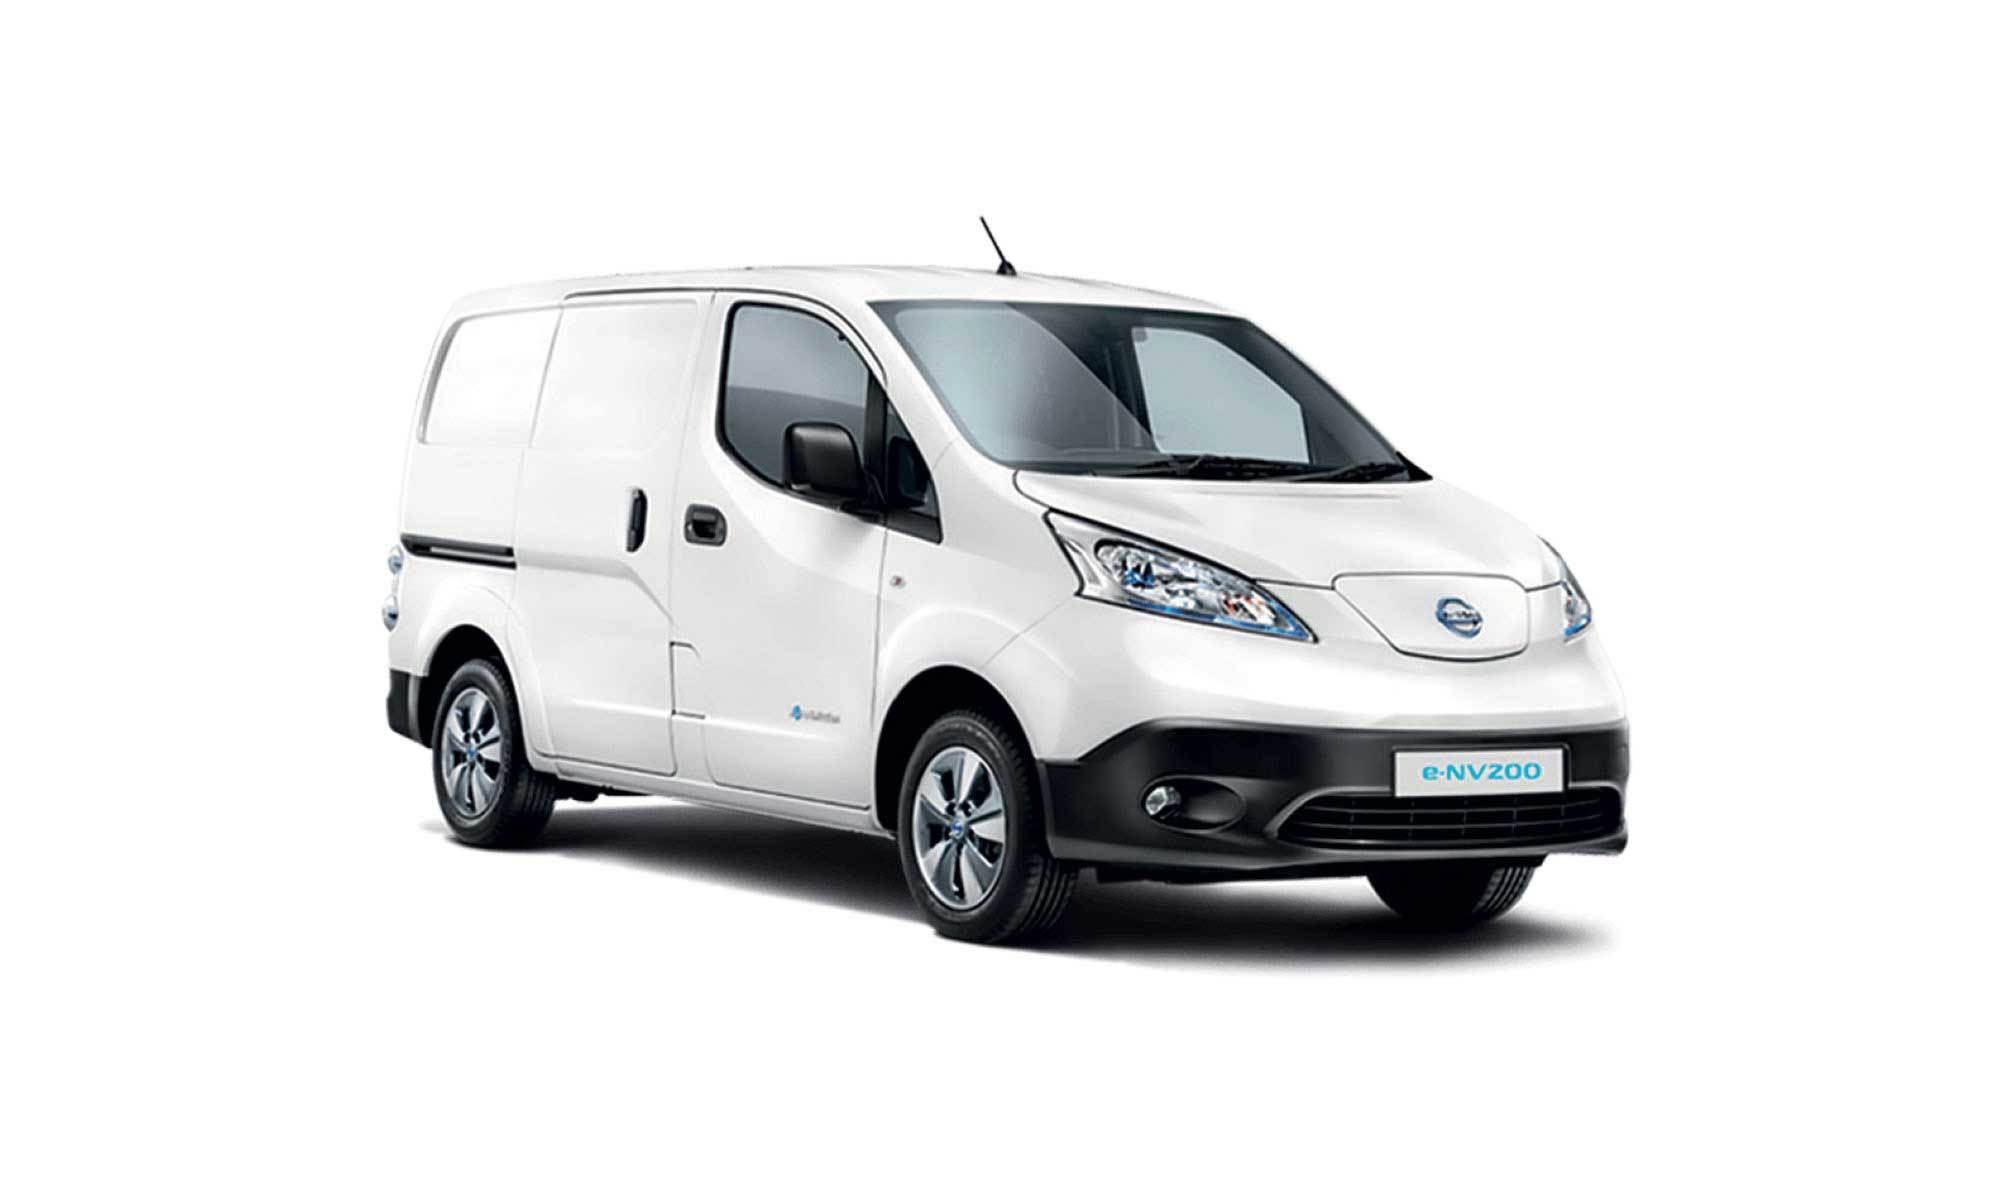 Nissan e-NV200 (2018) Charging Guide